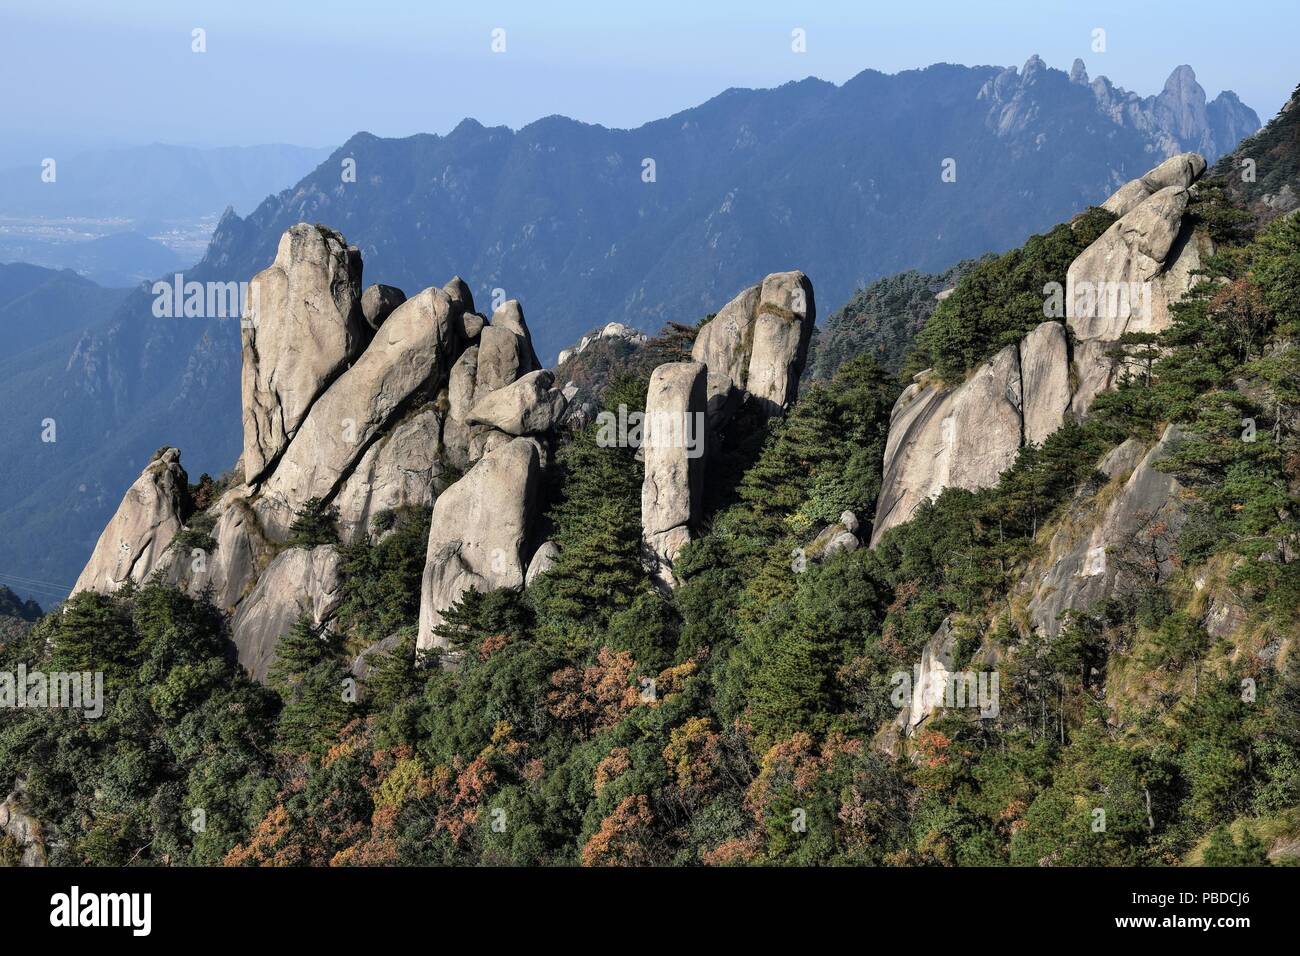 Mount Jiuhua, Nine Glorious Mountains, one of the four sacred mountains of Chinese Buddhism located in Qingyang County in Anhui province in China. Stock Photo